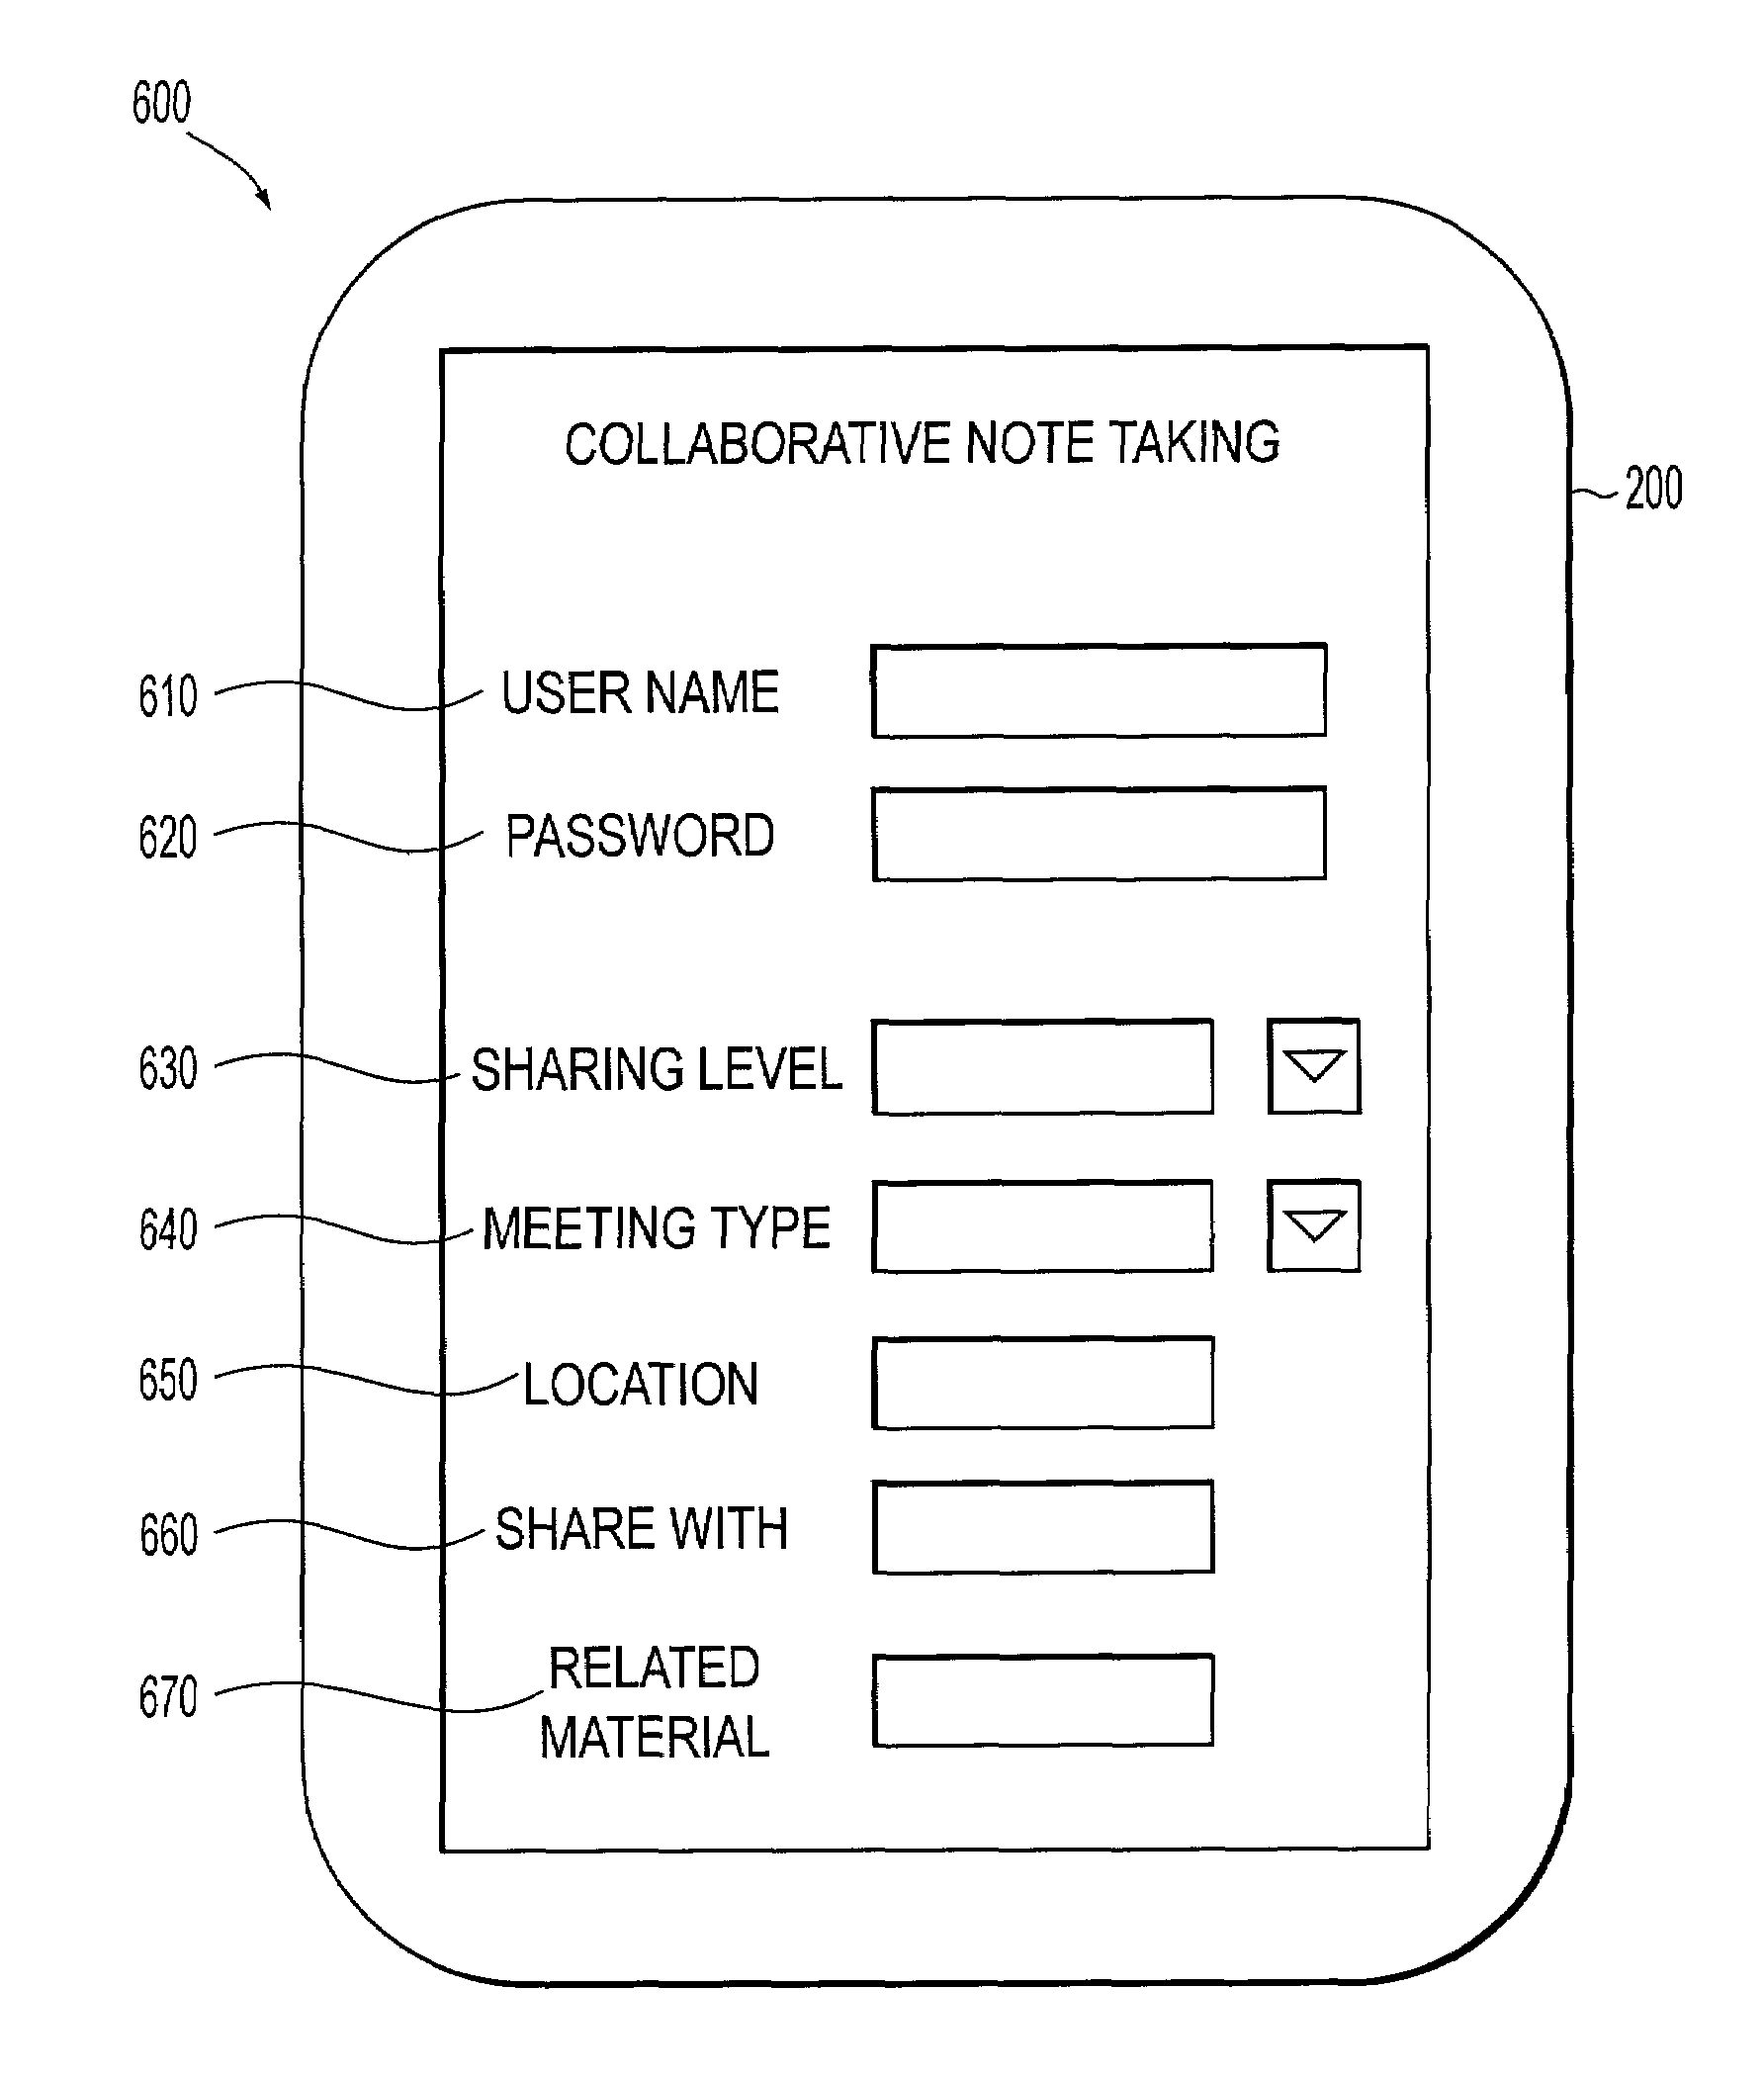 Systems and methods for displaying text recommendations during collaborative note taking